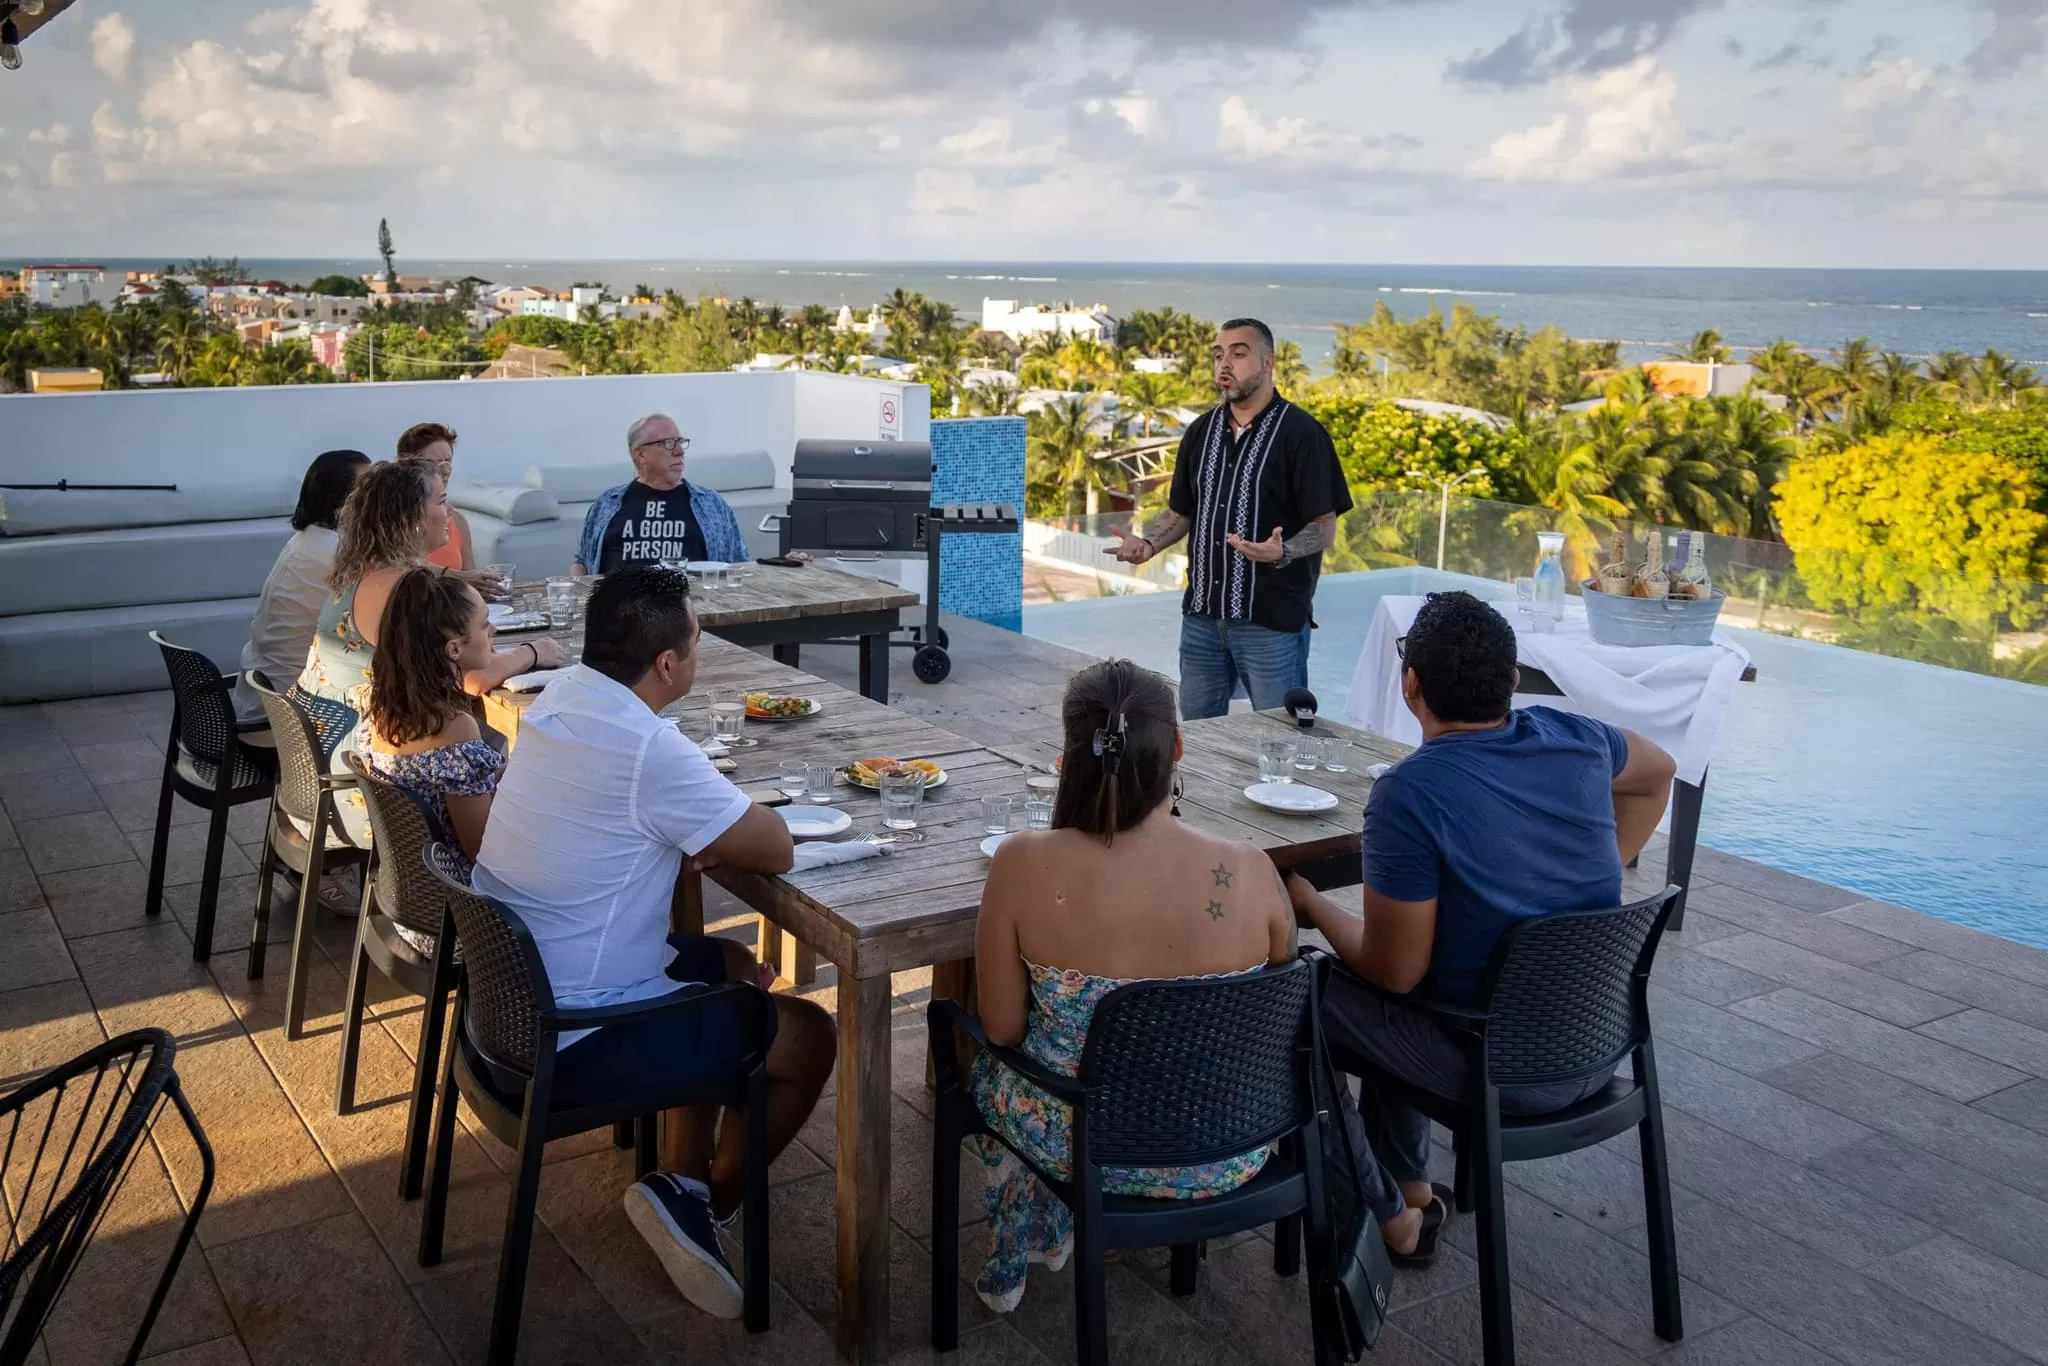 A group of people gathered around the table on the rooftop of Osteria Barocca next to the infinity pool with ocean views in the background.